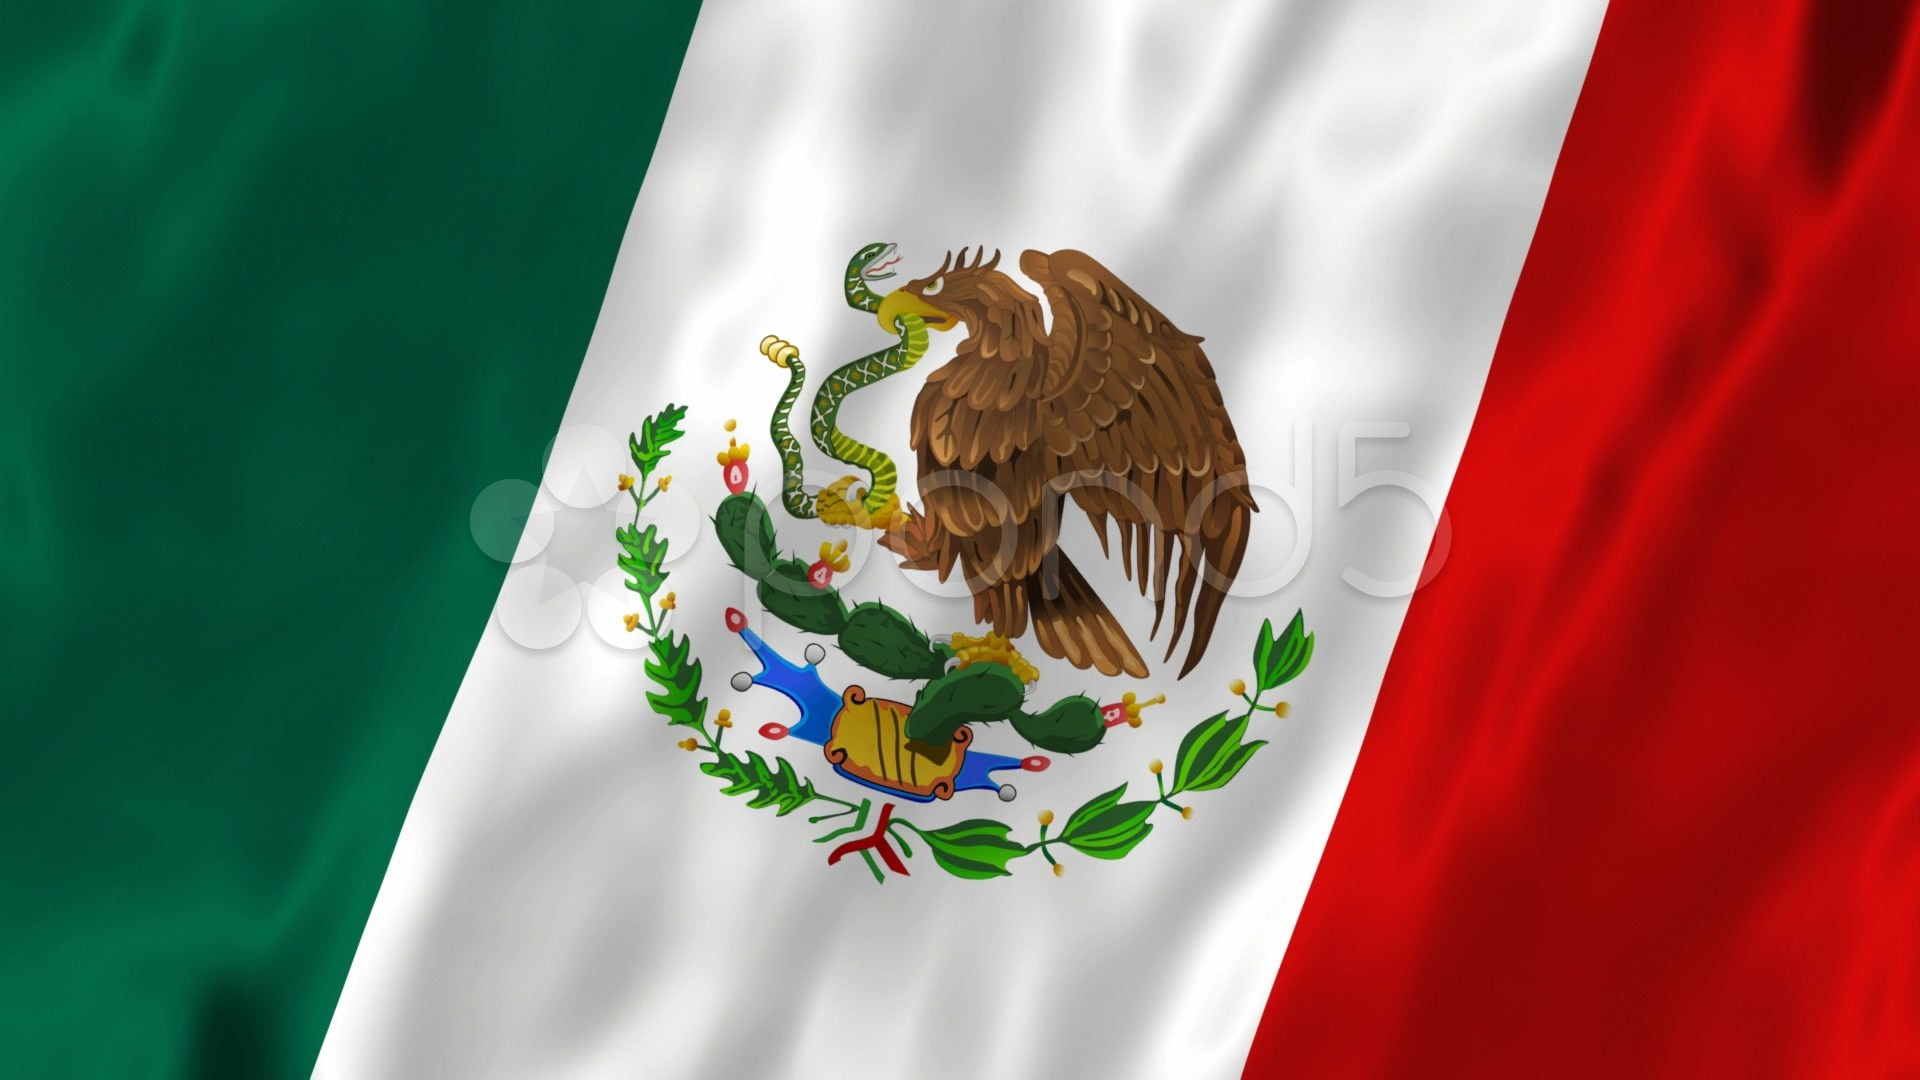 Great Mexican Flag Wallpaper Free Wallpaper For Desktop and Mobile in All Resolutions Free Download wallpaper Best